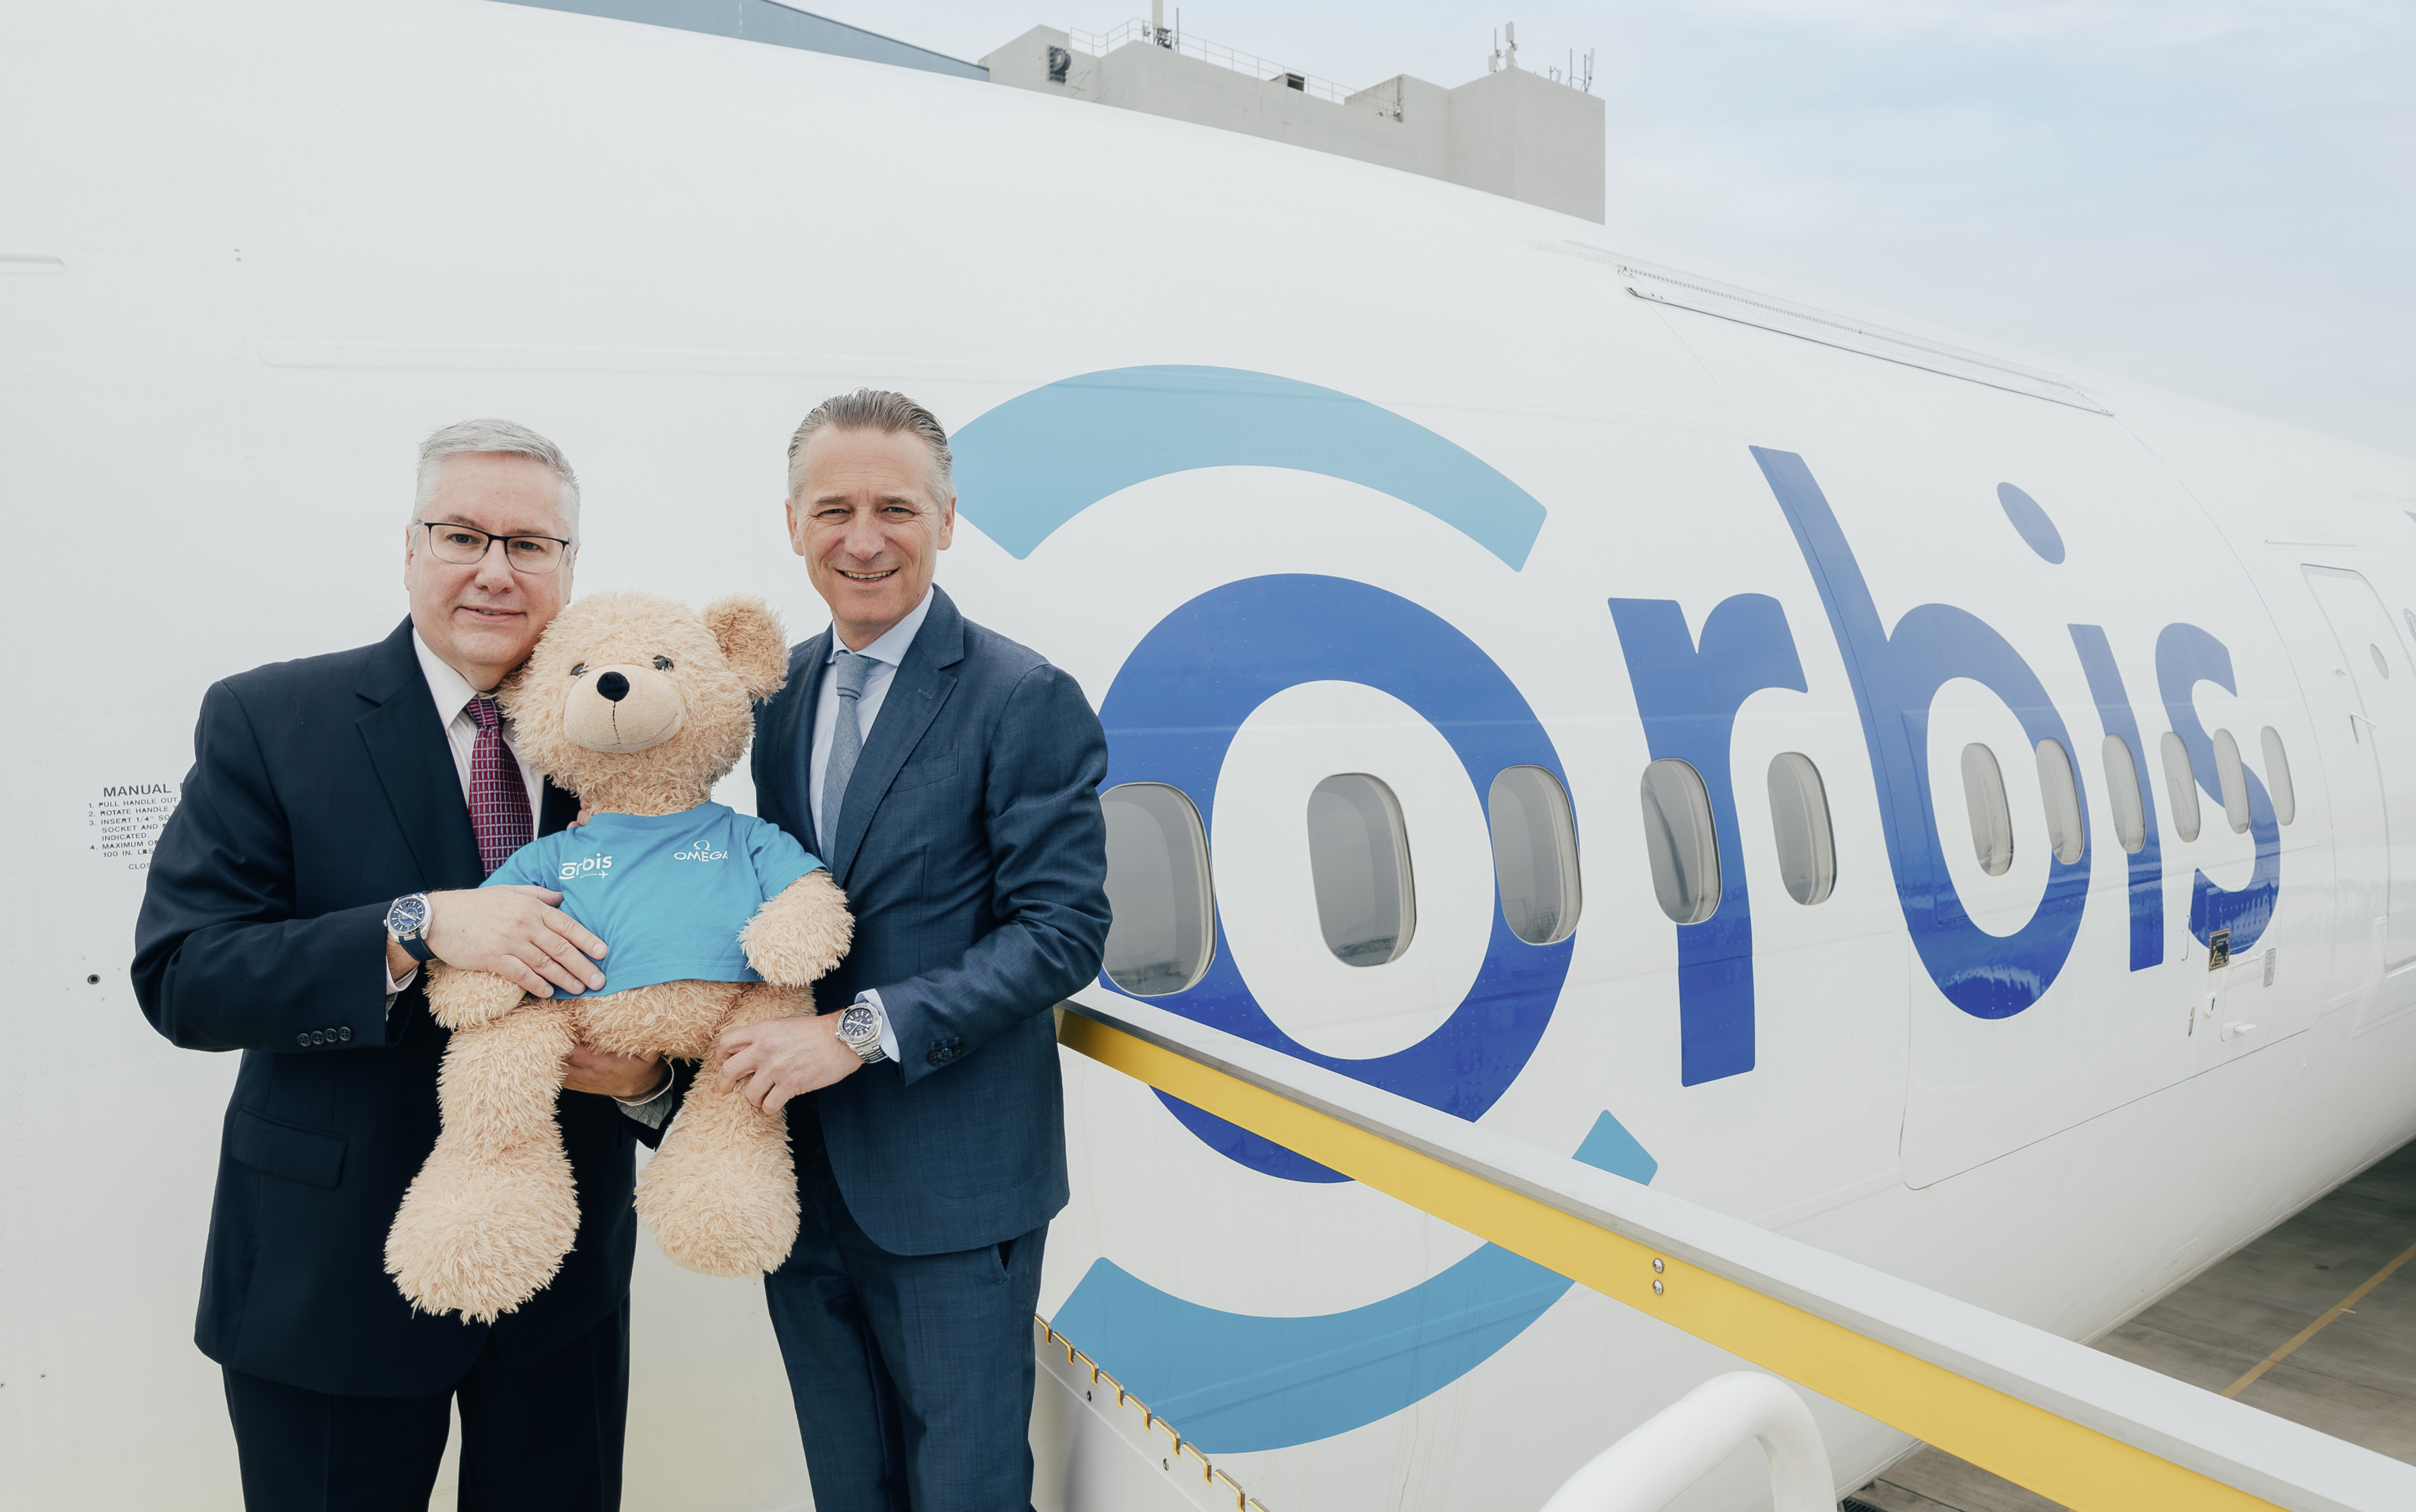 Orbis president and CEO Derek Hodkey (left) with Omega CEO and president Raynald Aeschlimann. Omega supports the flying eye hospital through its CSR initiative. Photo: Handout